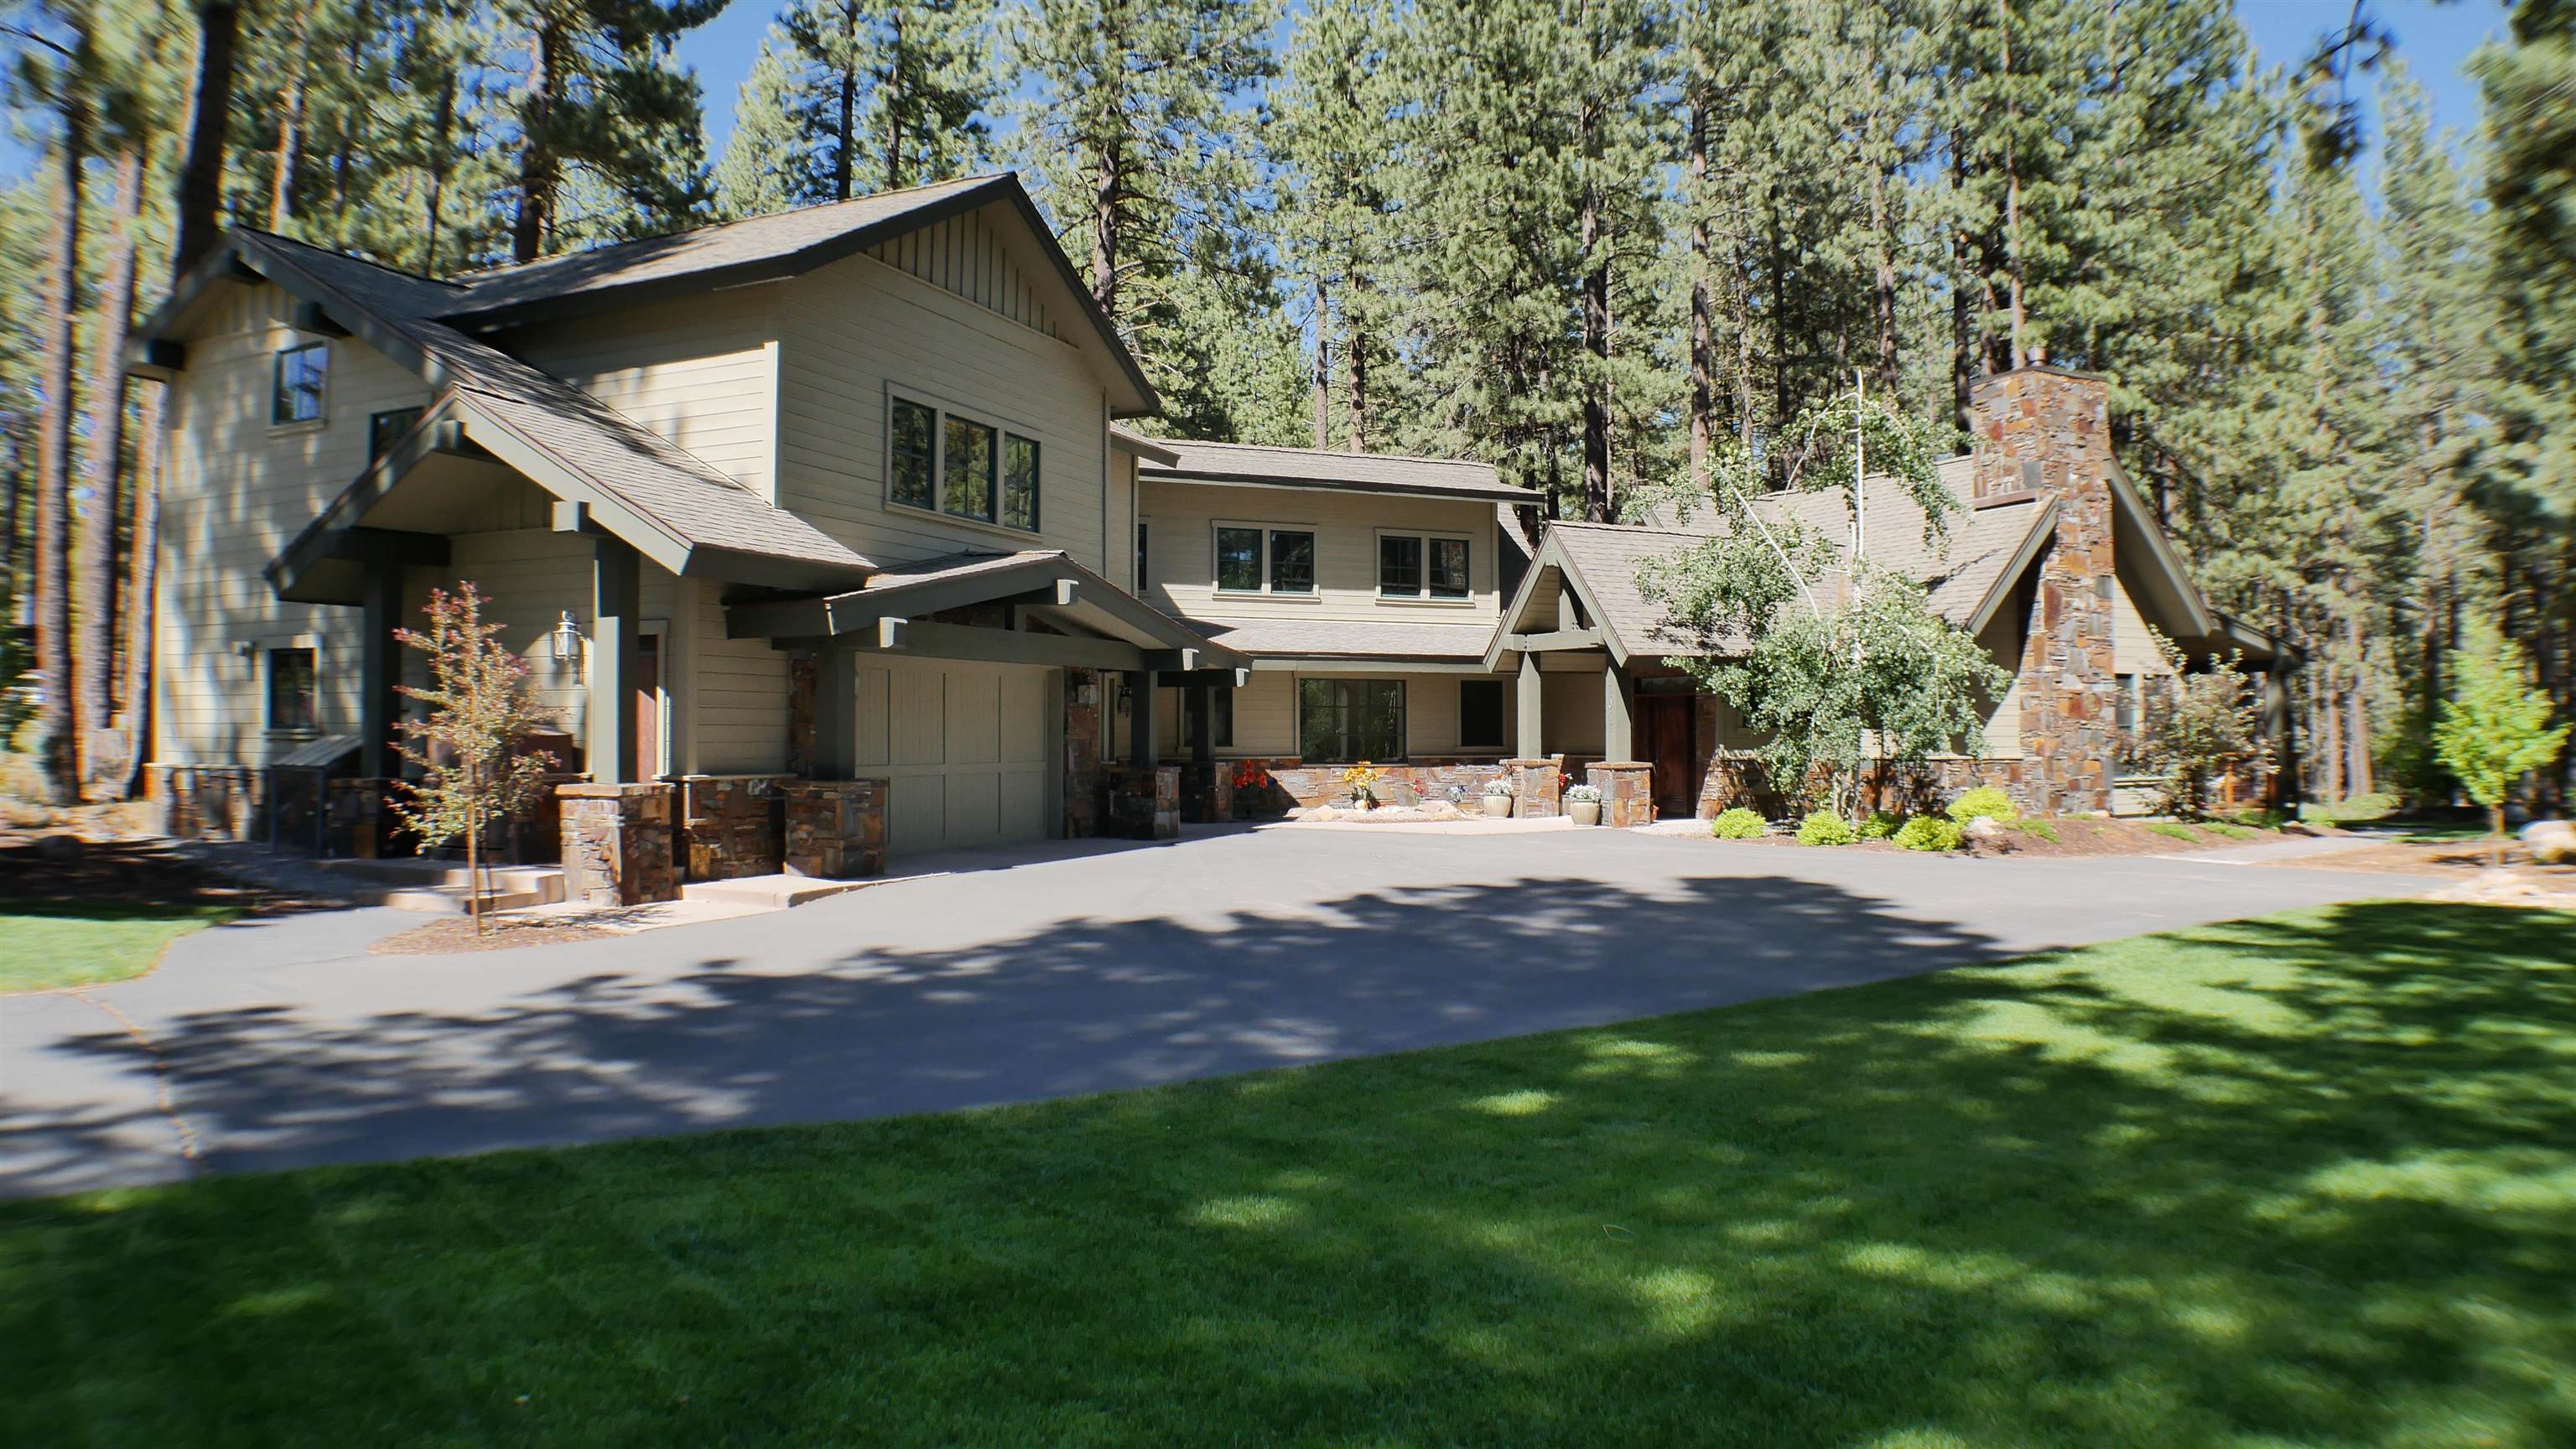 Image for 11077 Comstock Drive, Truckee, CA 96161-0000